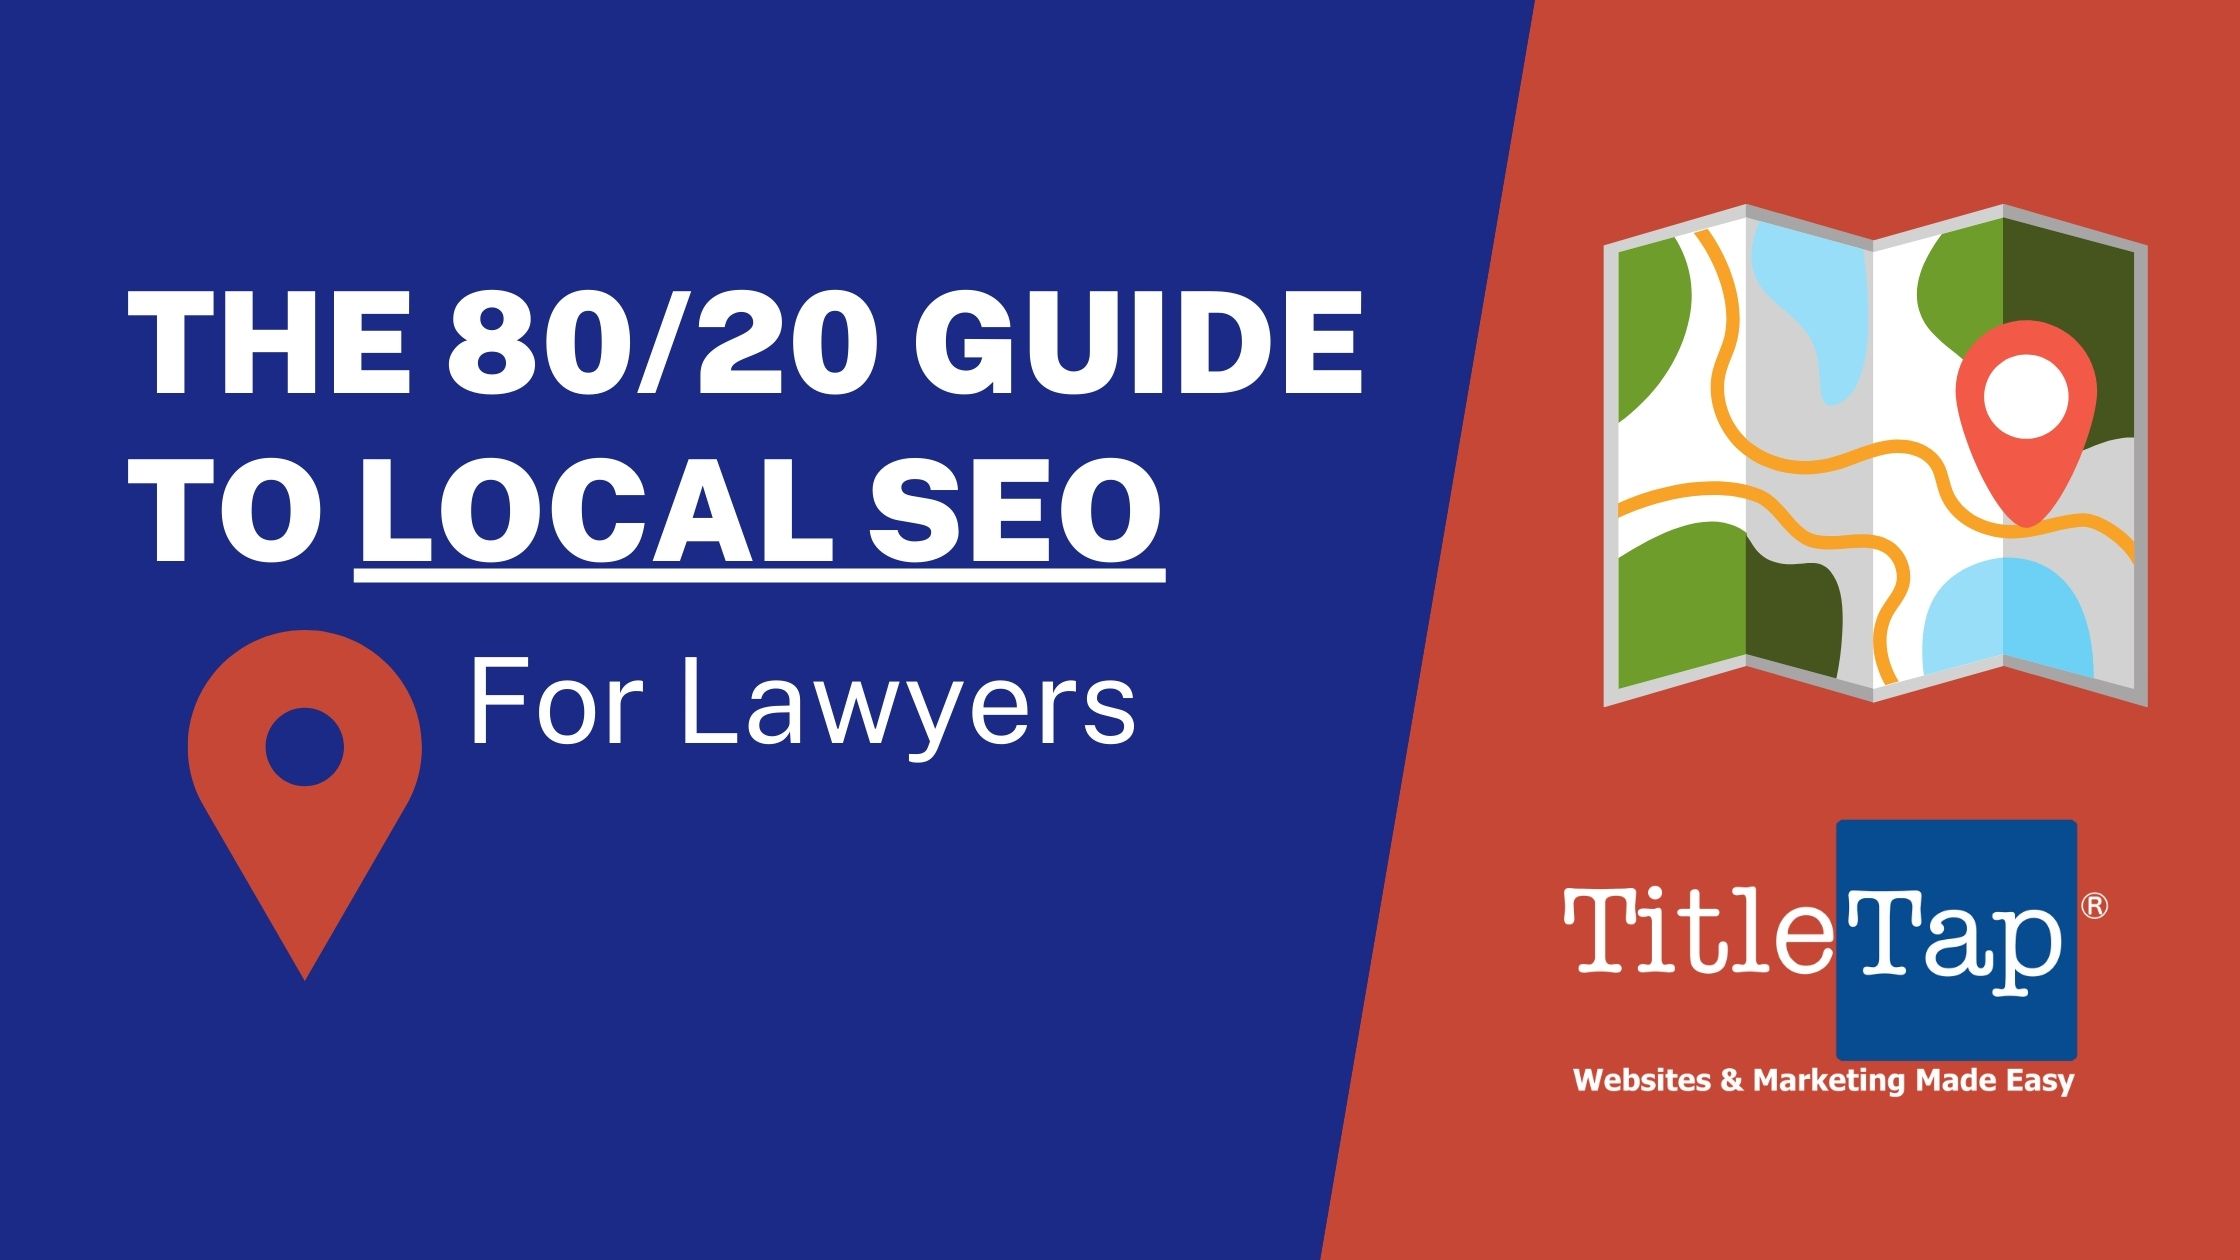 The 80/20 guide to local SEO for lawyers